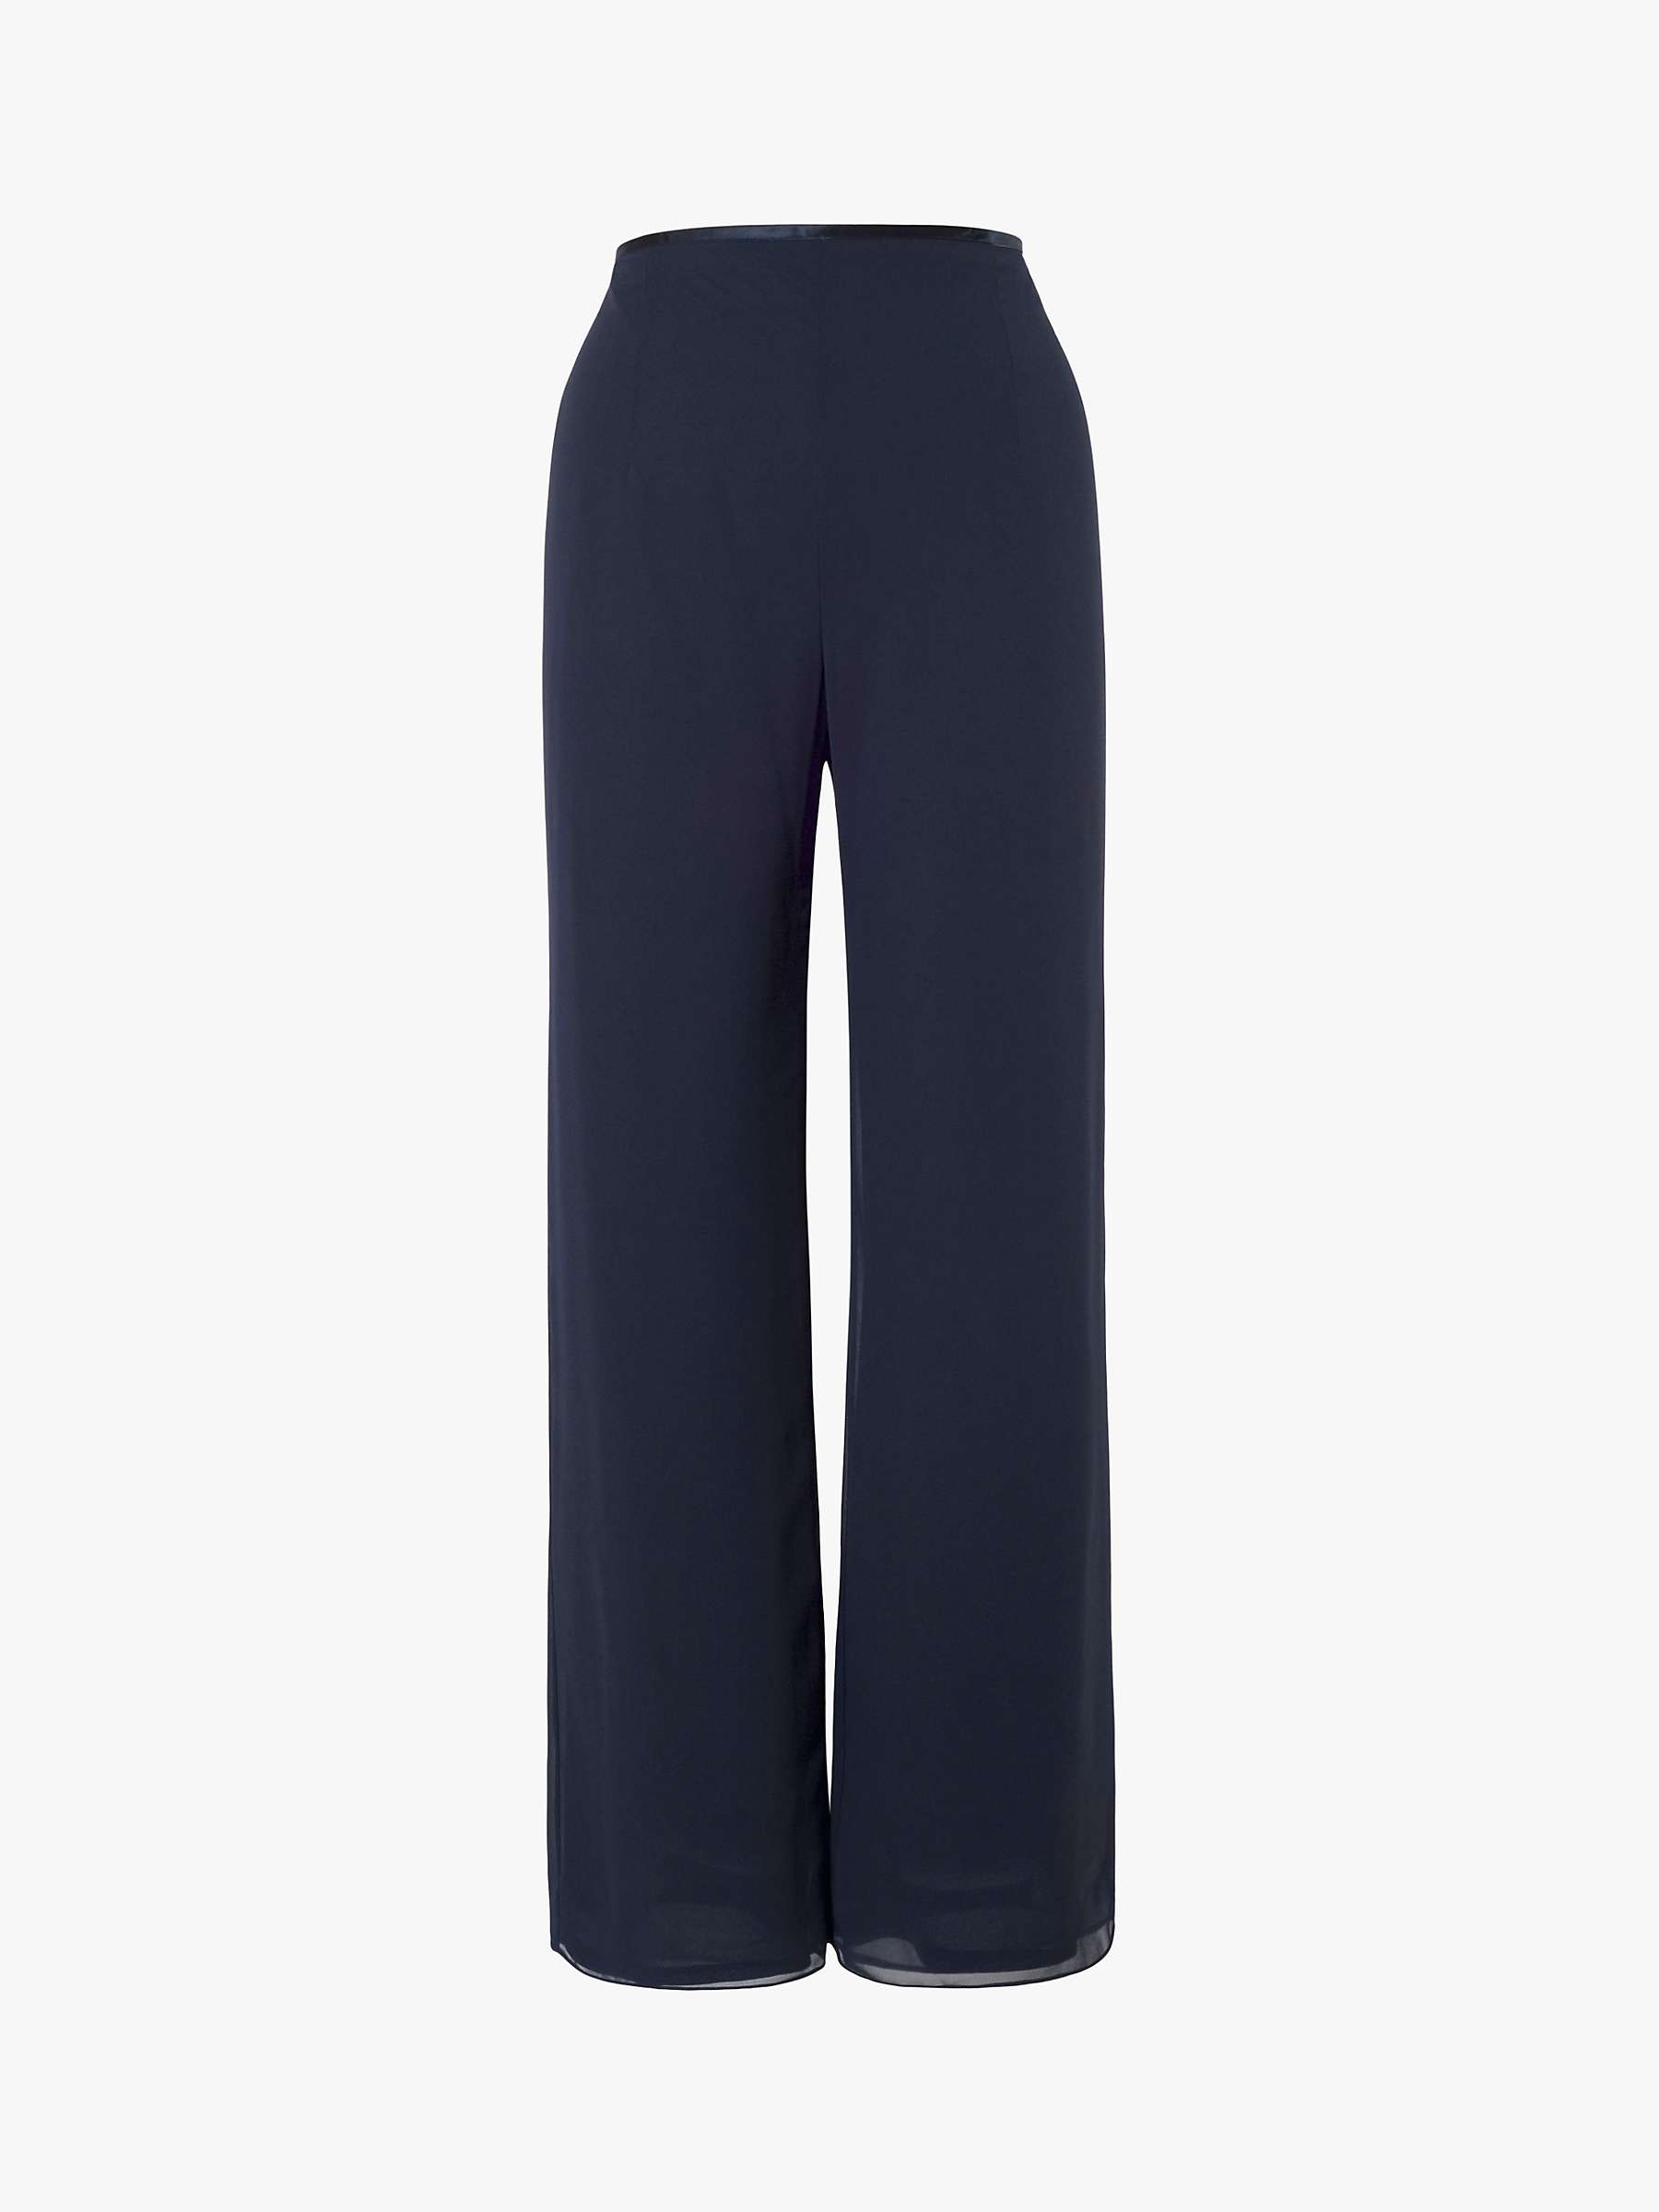 Buy Chesca Satin Trim Chiffon Trousers Online at johnlewis.com